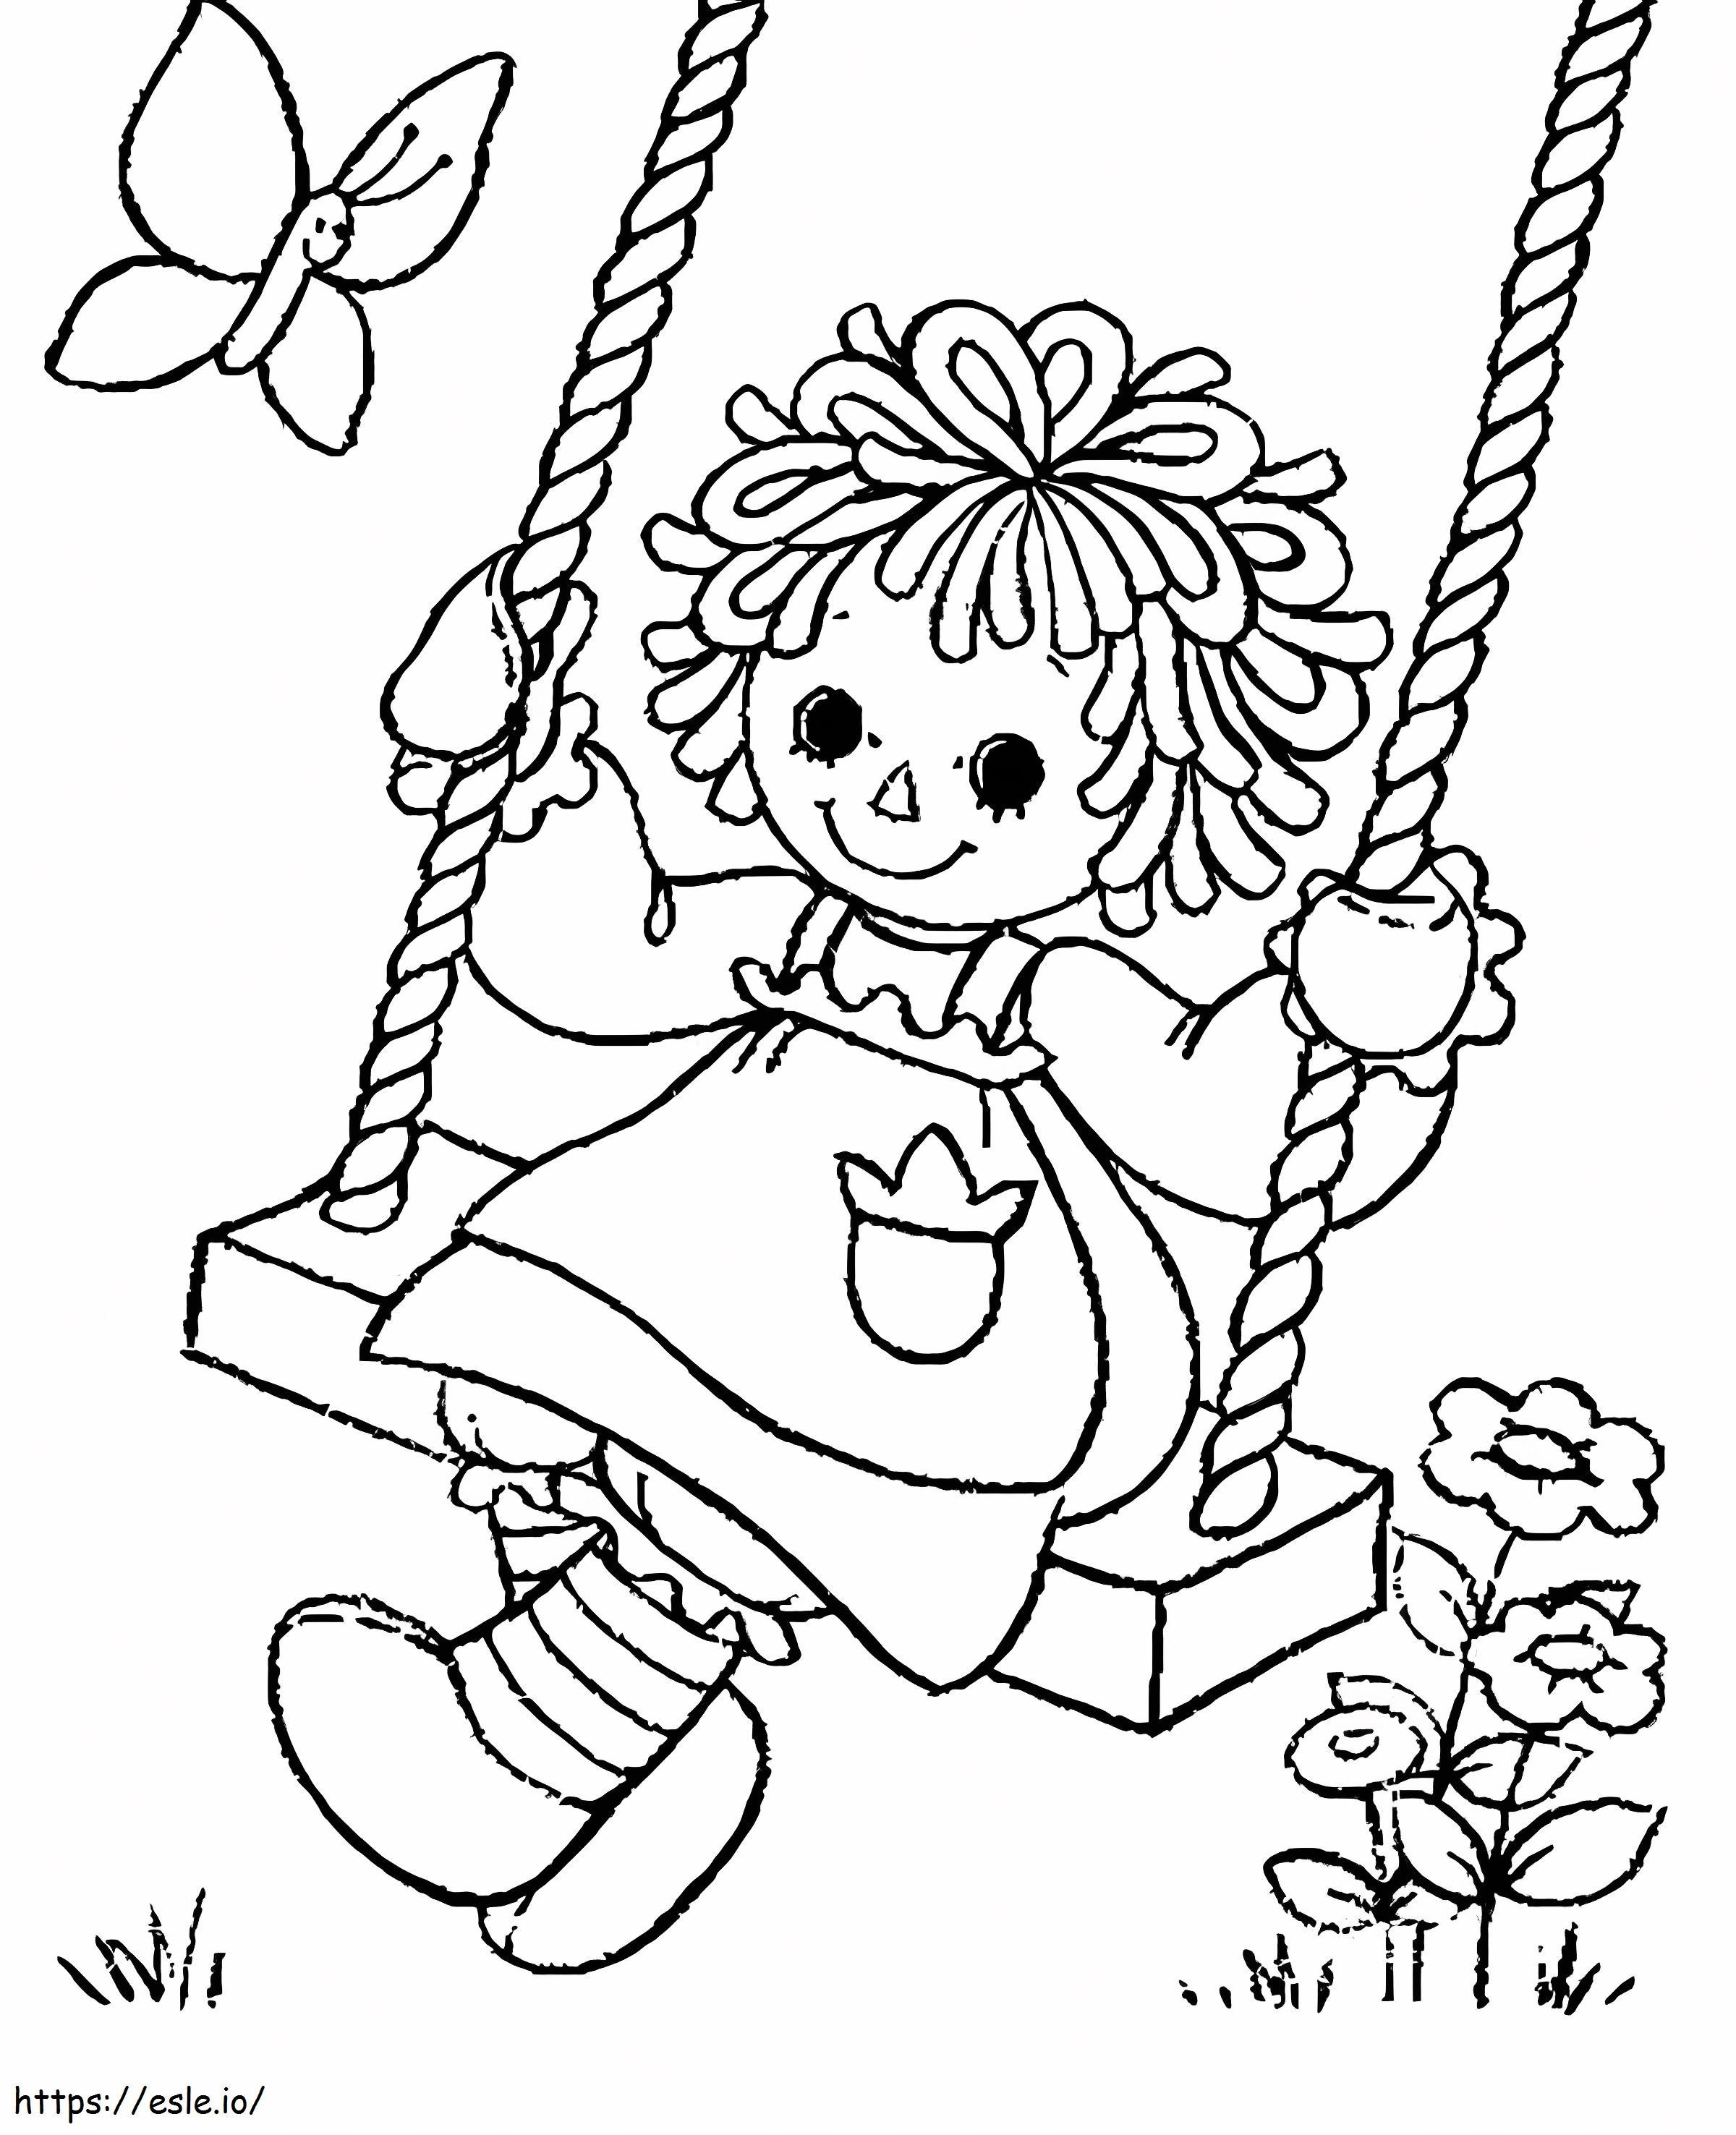 Doll On A Swing coloring page